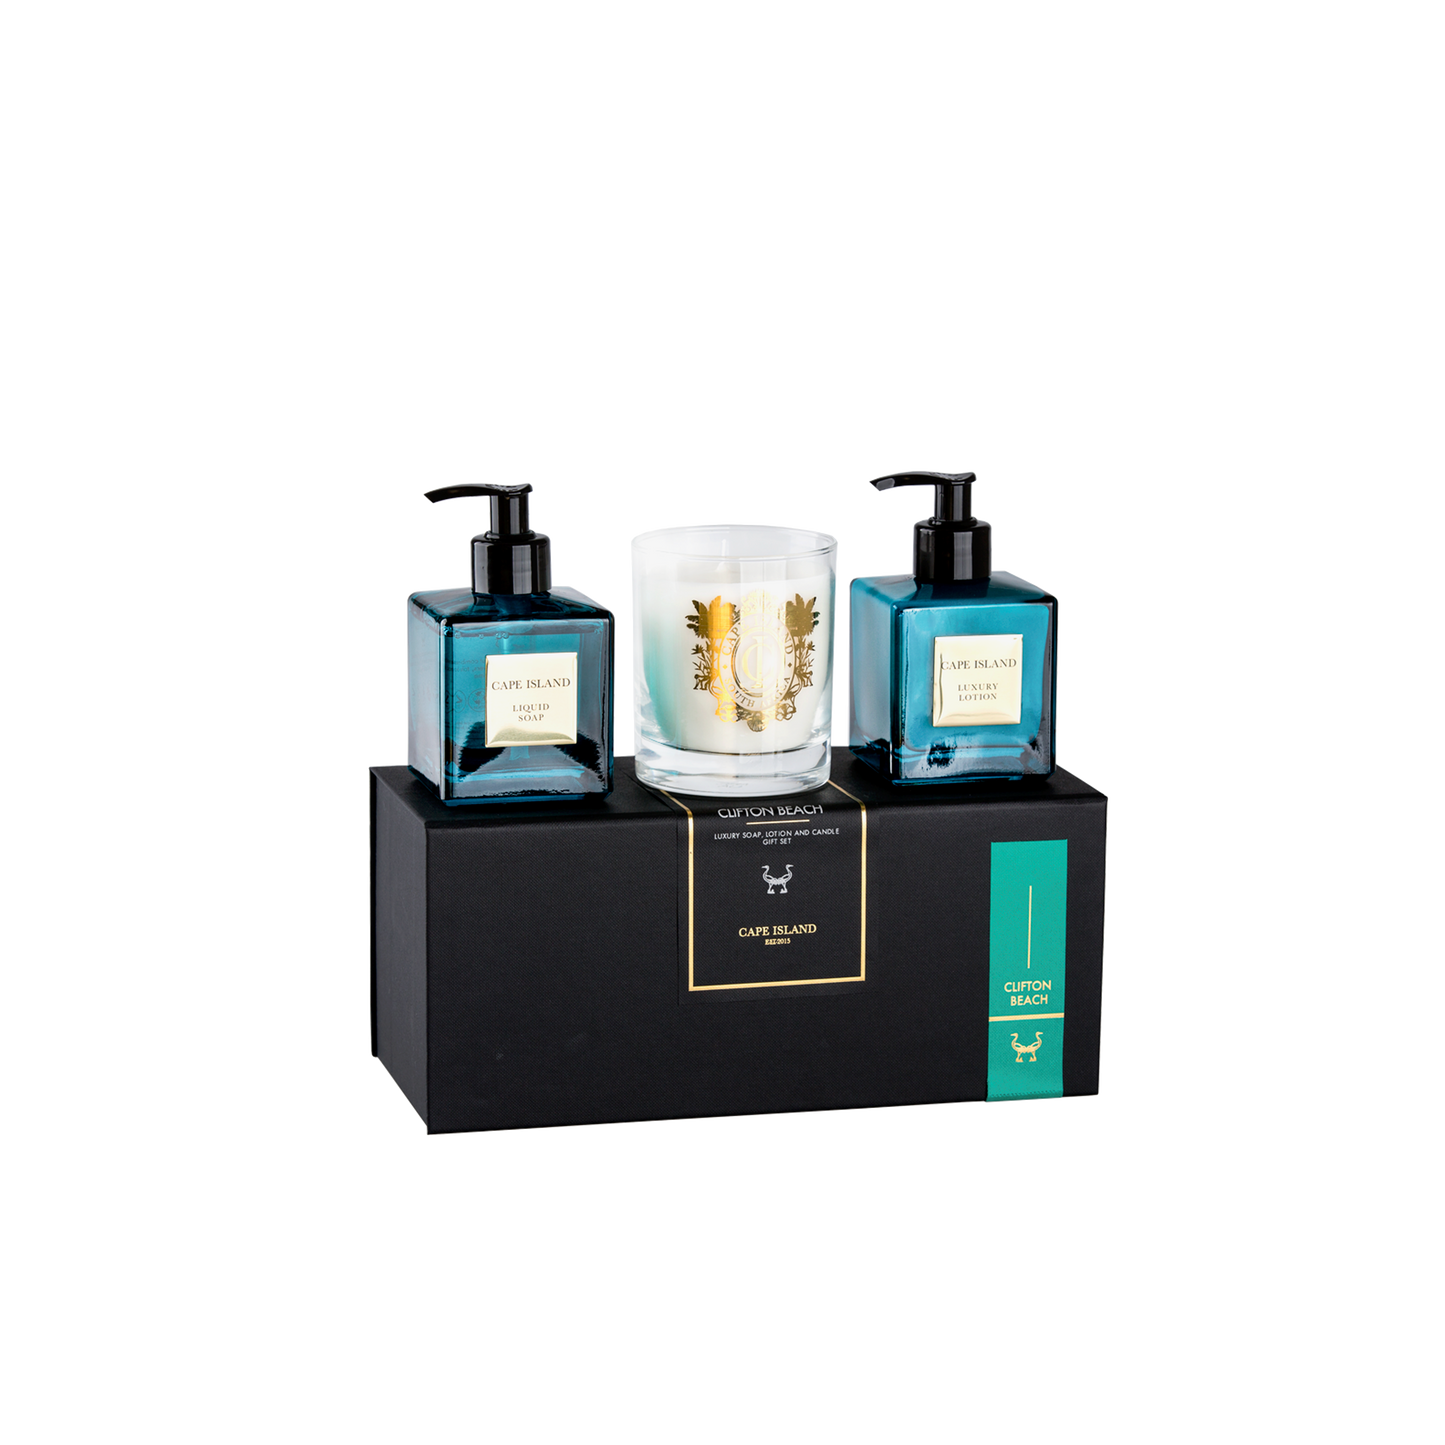 Clifton Beach Luxury Liquid Soap, Lotion & Candle Collection